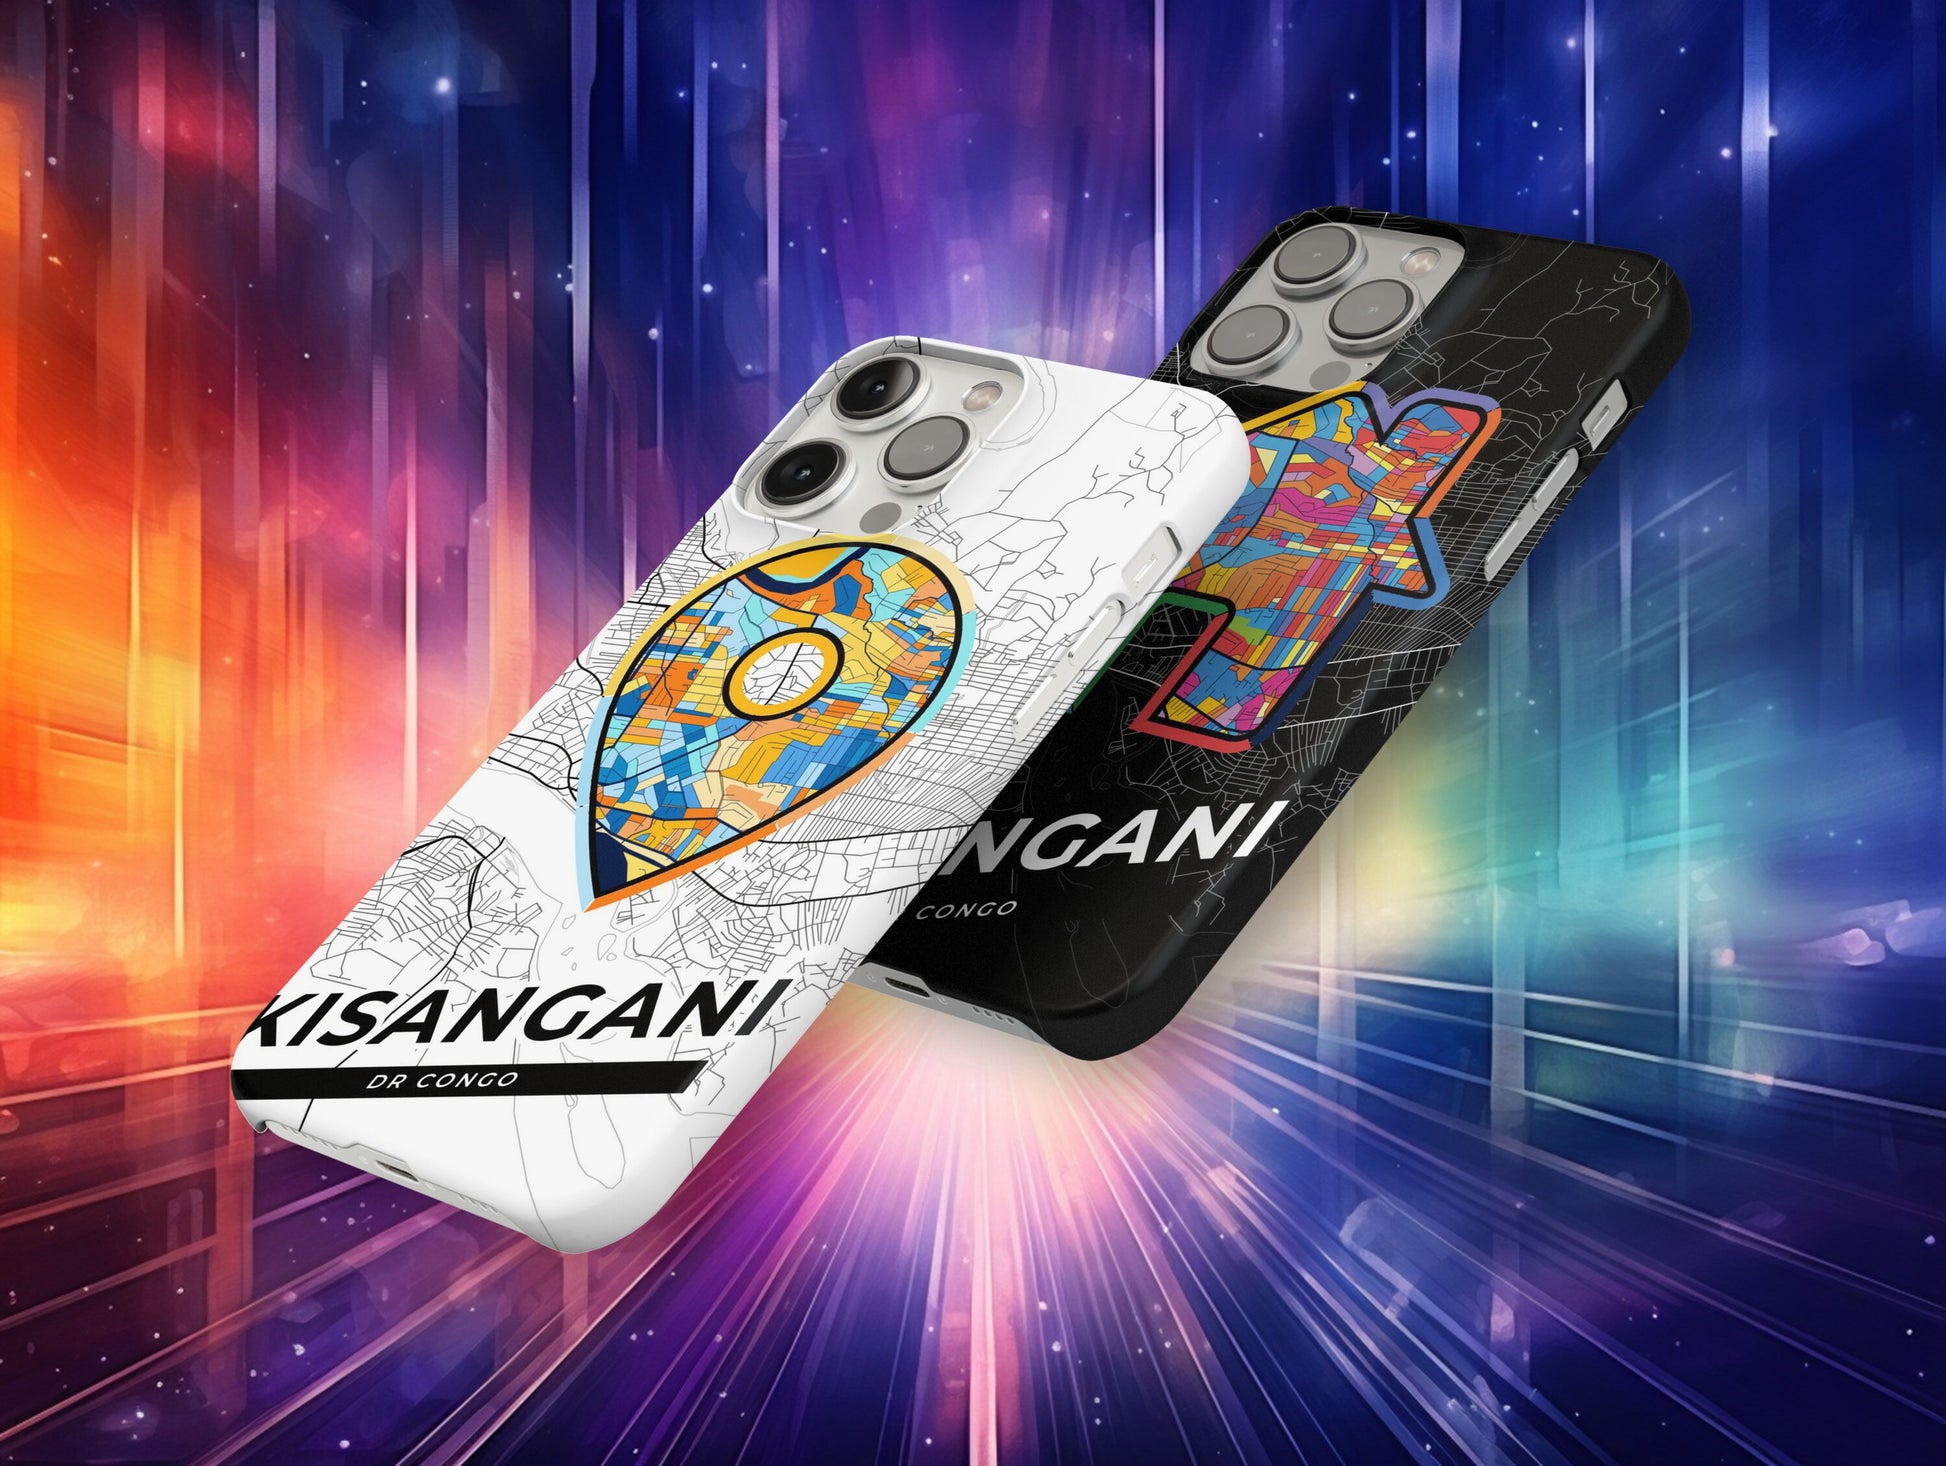 Kisangani Dr Congo slim phone case with colorful icon. Birthday, wedding or housewarming gift. Couple match cases.